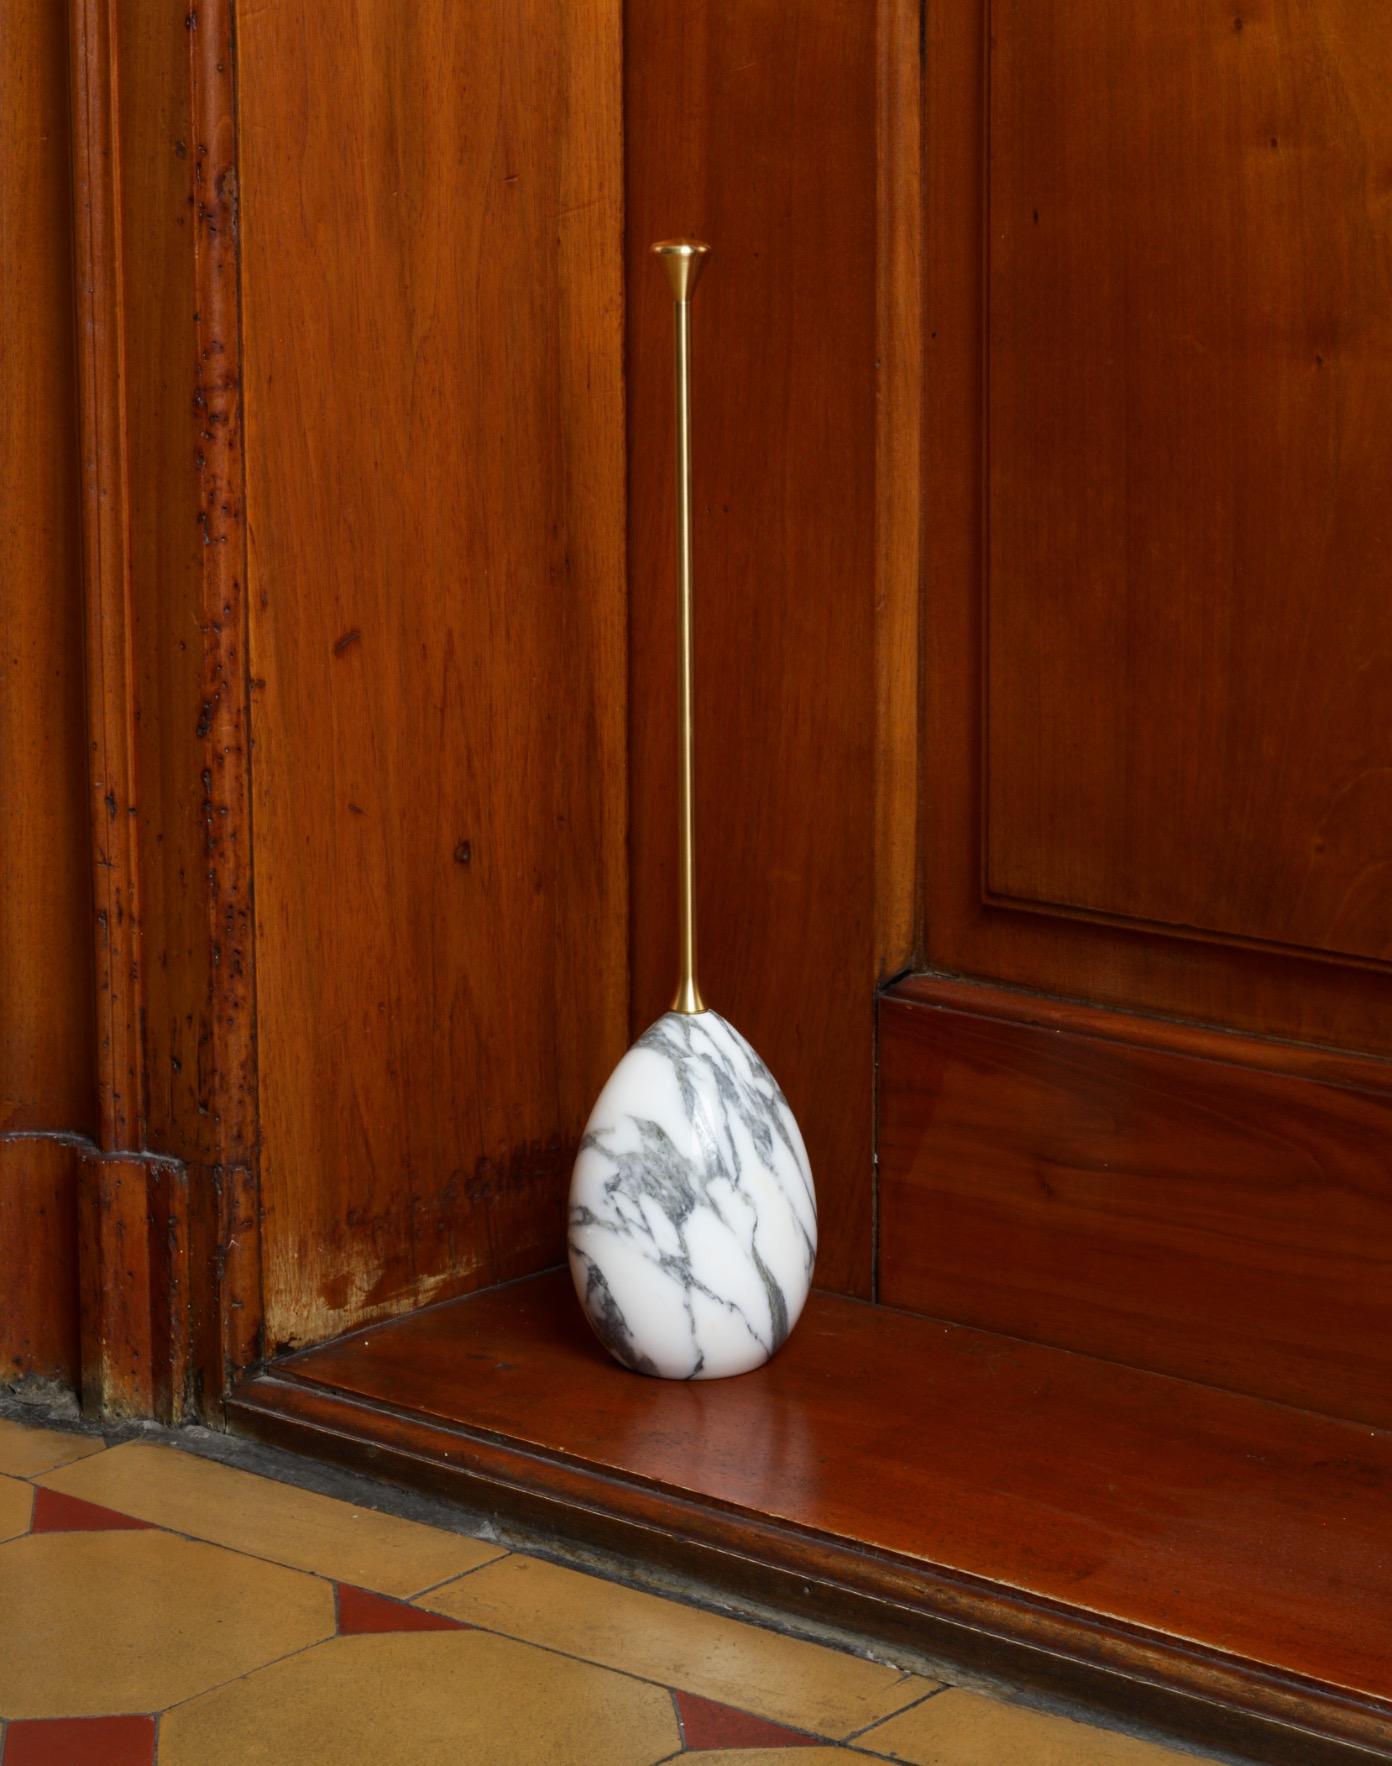 Mid-century Italian inspired doorstop. It pairs marble and brass to great effect. The sculpted handle provides a comfortable grip to securely place the doorstop where needed.
The handle is made of solid brass, oiled and threaded. It can also be